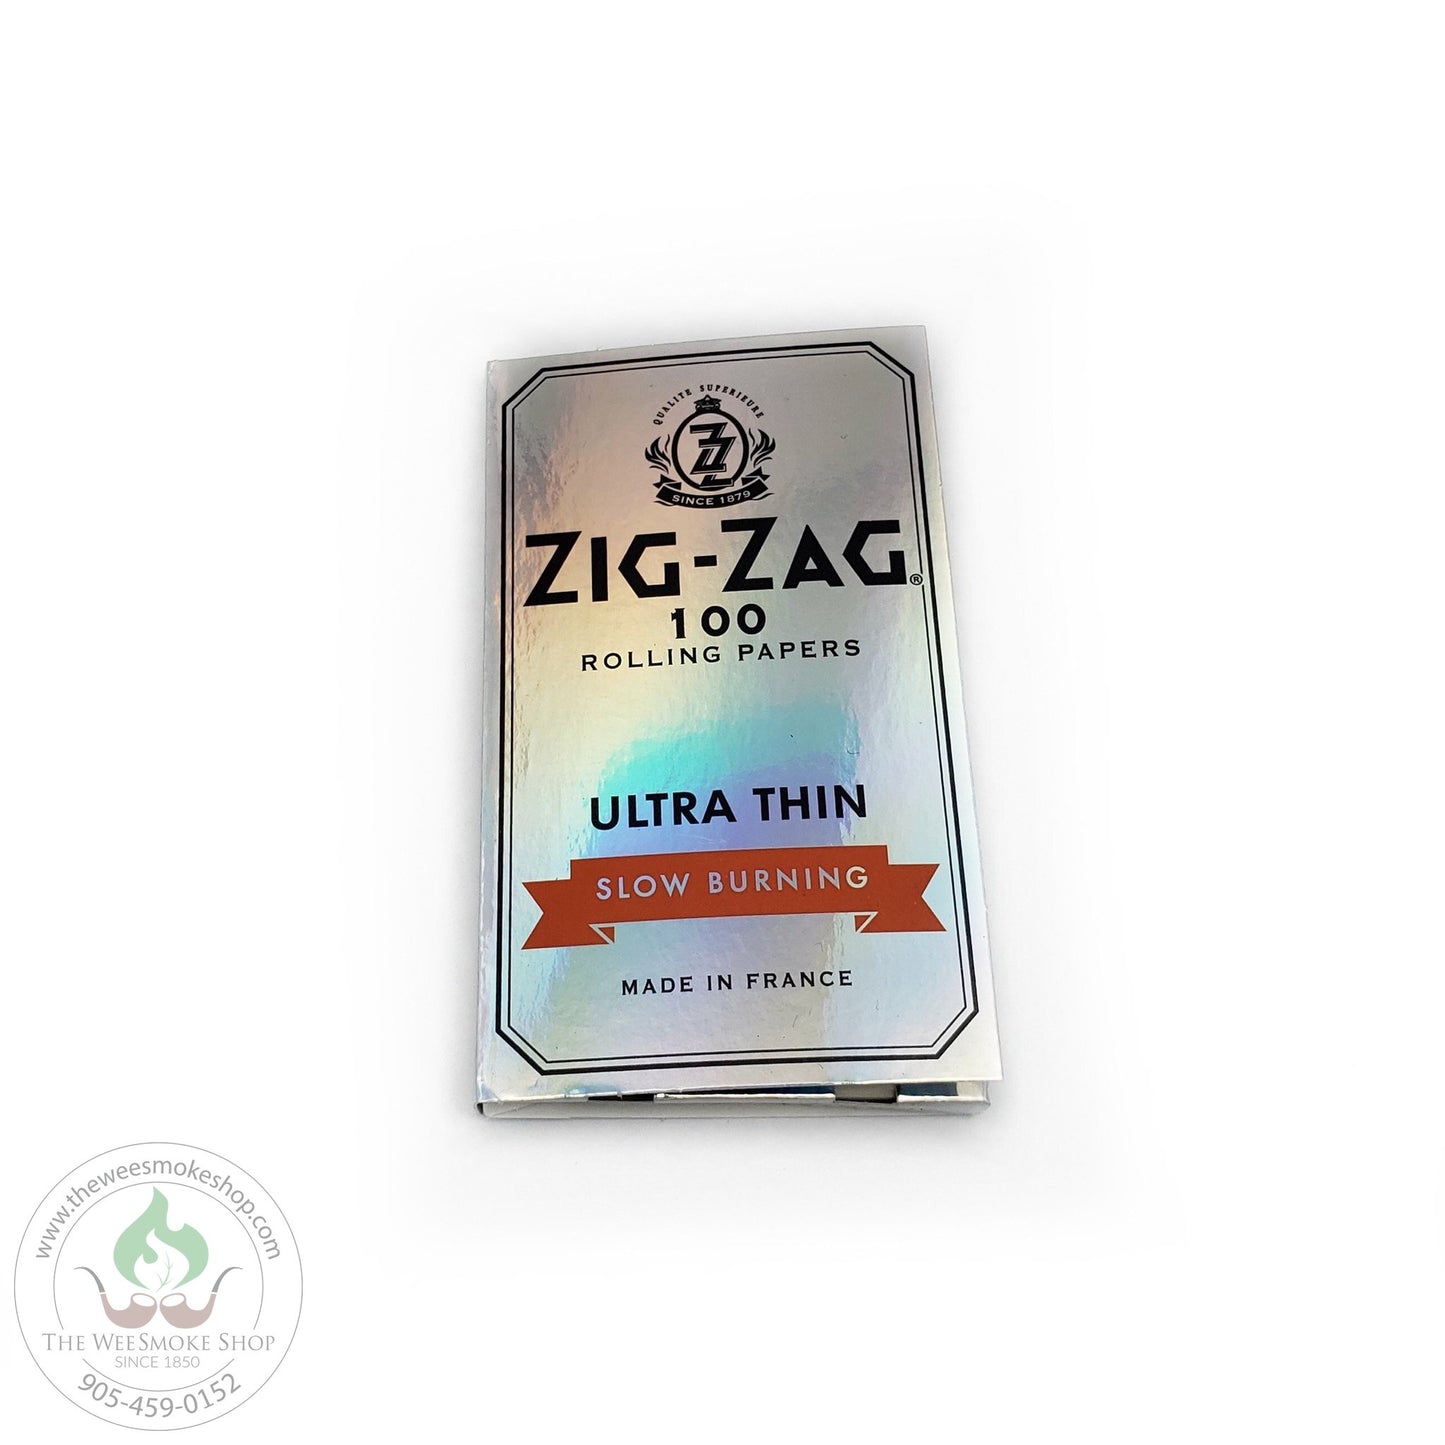 Zig Zag Ultra Thin Rolling Papers-rolling papers that are slow burning. Pack of 100 papers